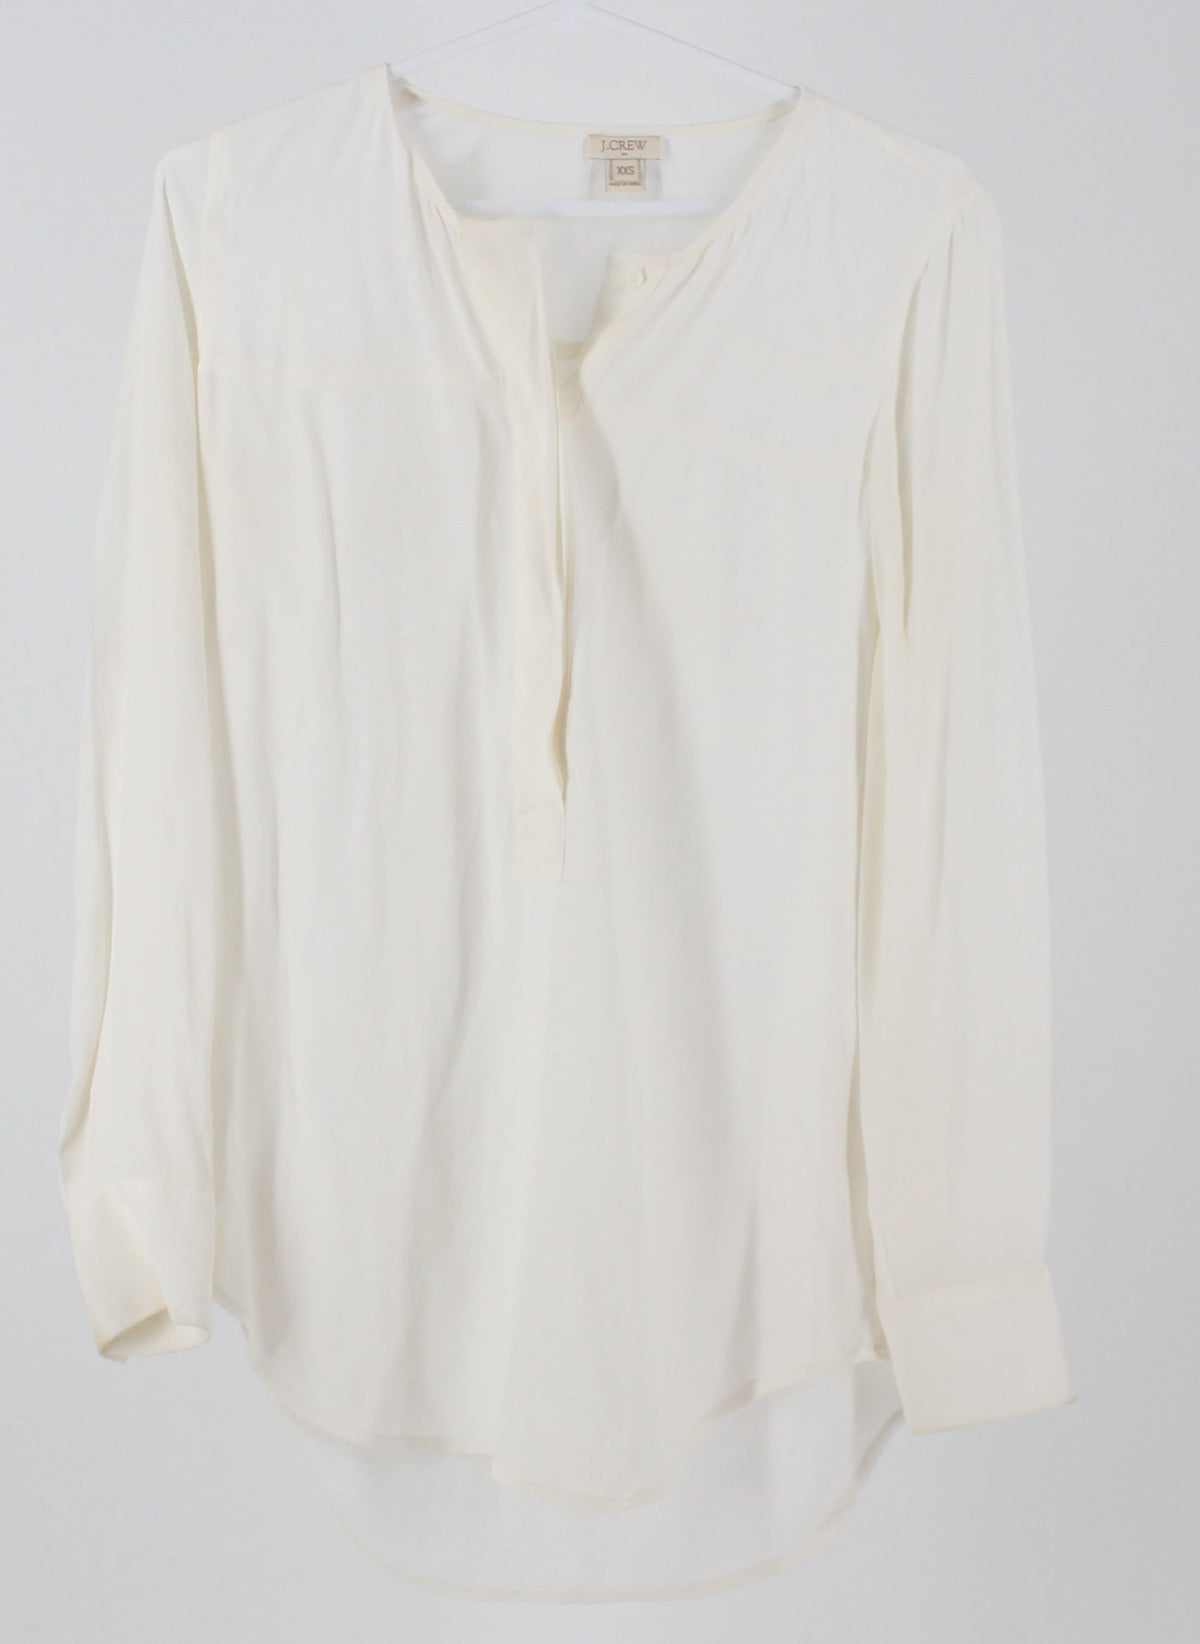 J.CREW white long sleeve button up blouse